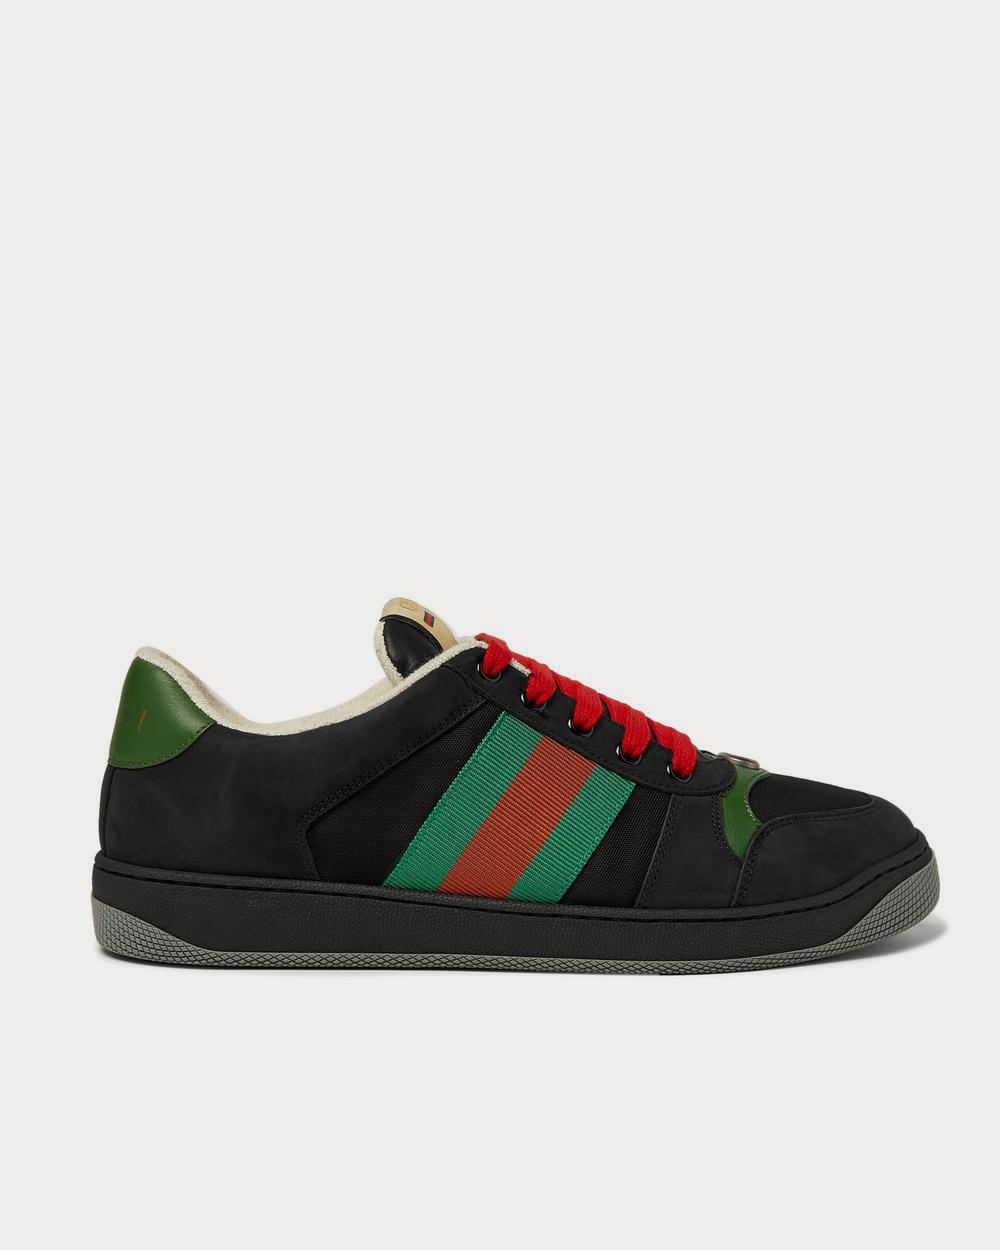 Gucci Ace GG Supreme Brown Low Top Sneakers - Sneak in Peace